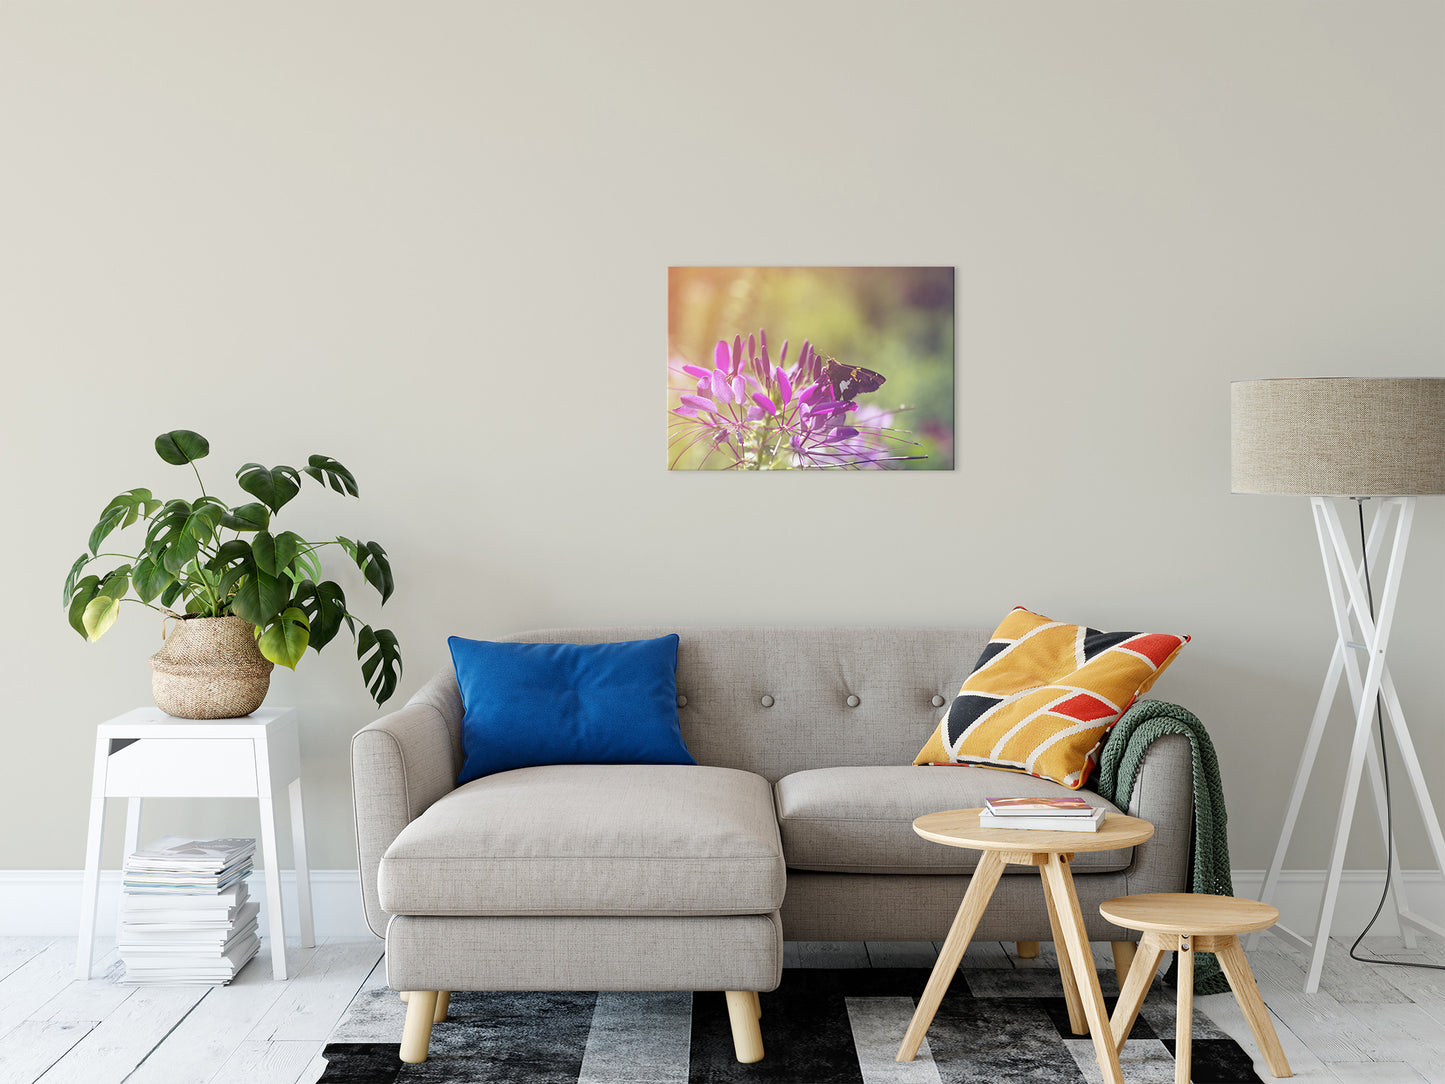 Spider Flower in Glory Light Floral Photo Fine Art Canvas Wall Art Prints 20" x 30" - PIPAFINEART